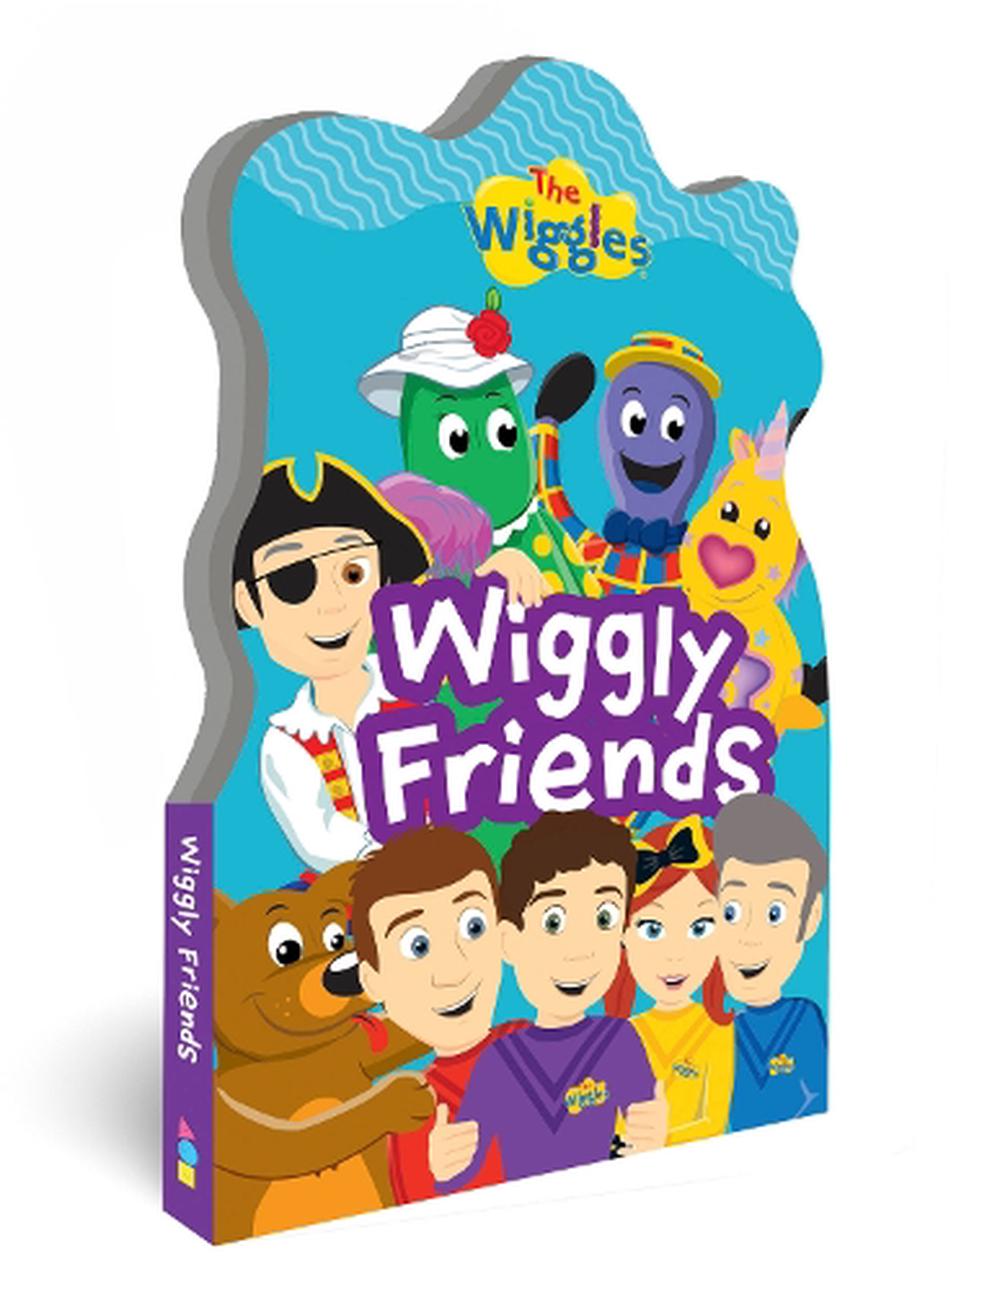 The Wiggles Wiggly Friends Shaped Board Book By Thewiggles Board